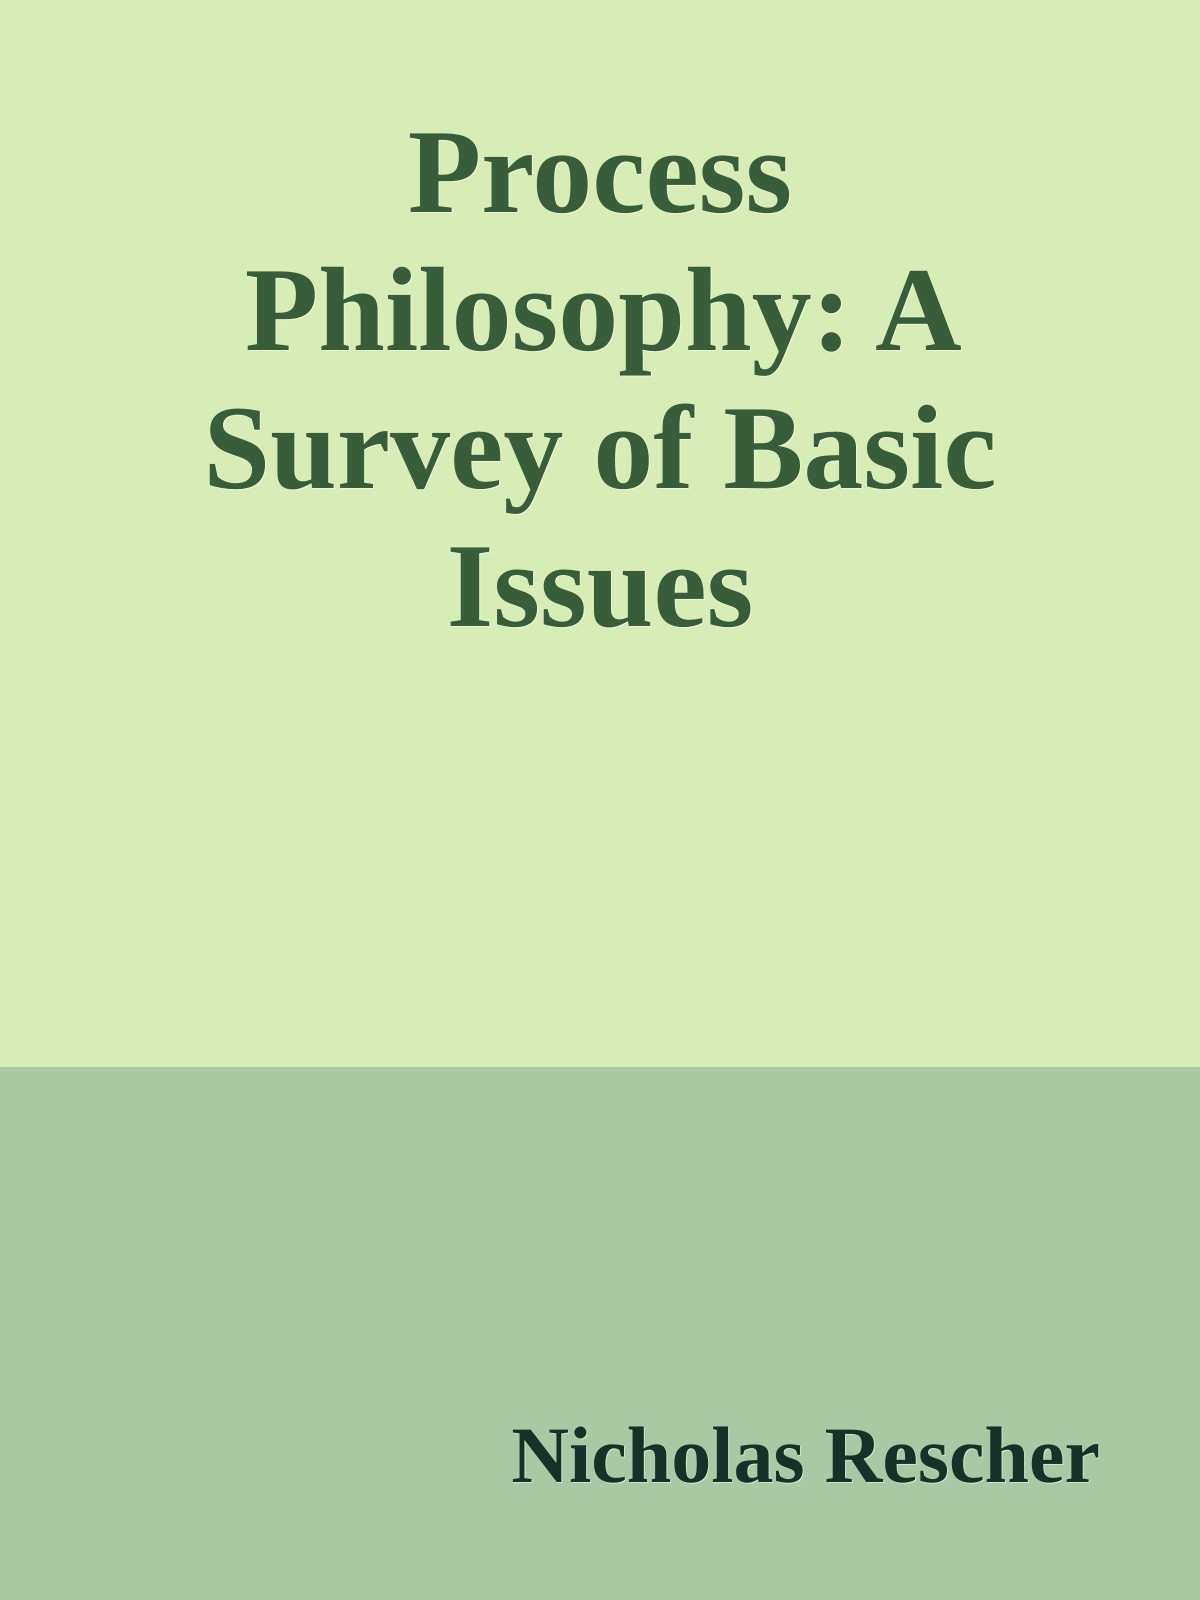 Process Philosophy: A Survey of Basic Issues